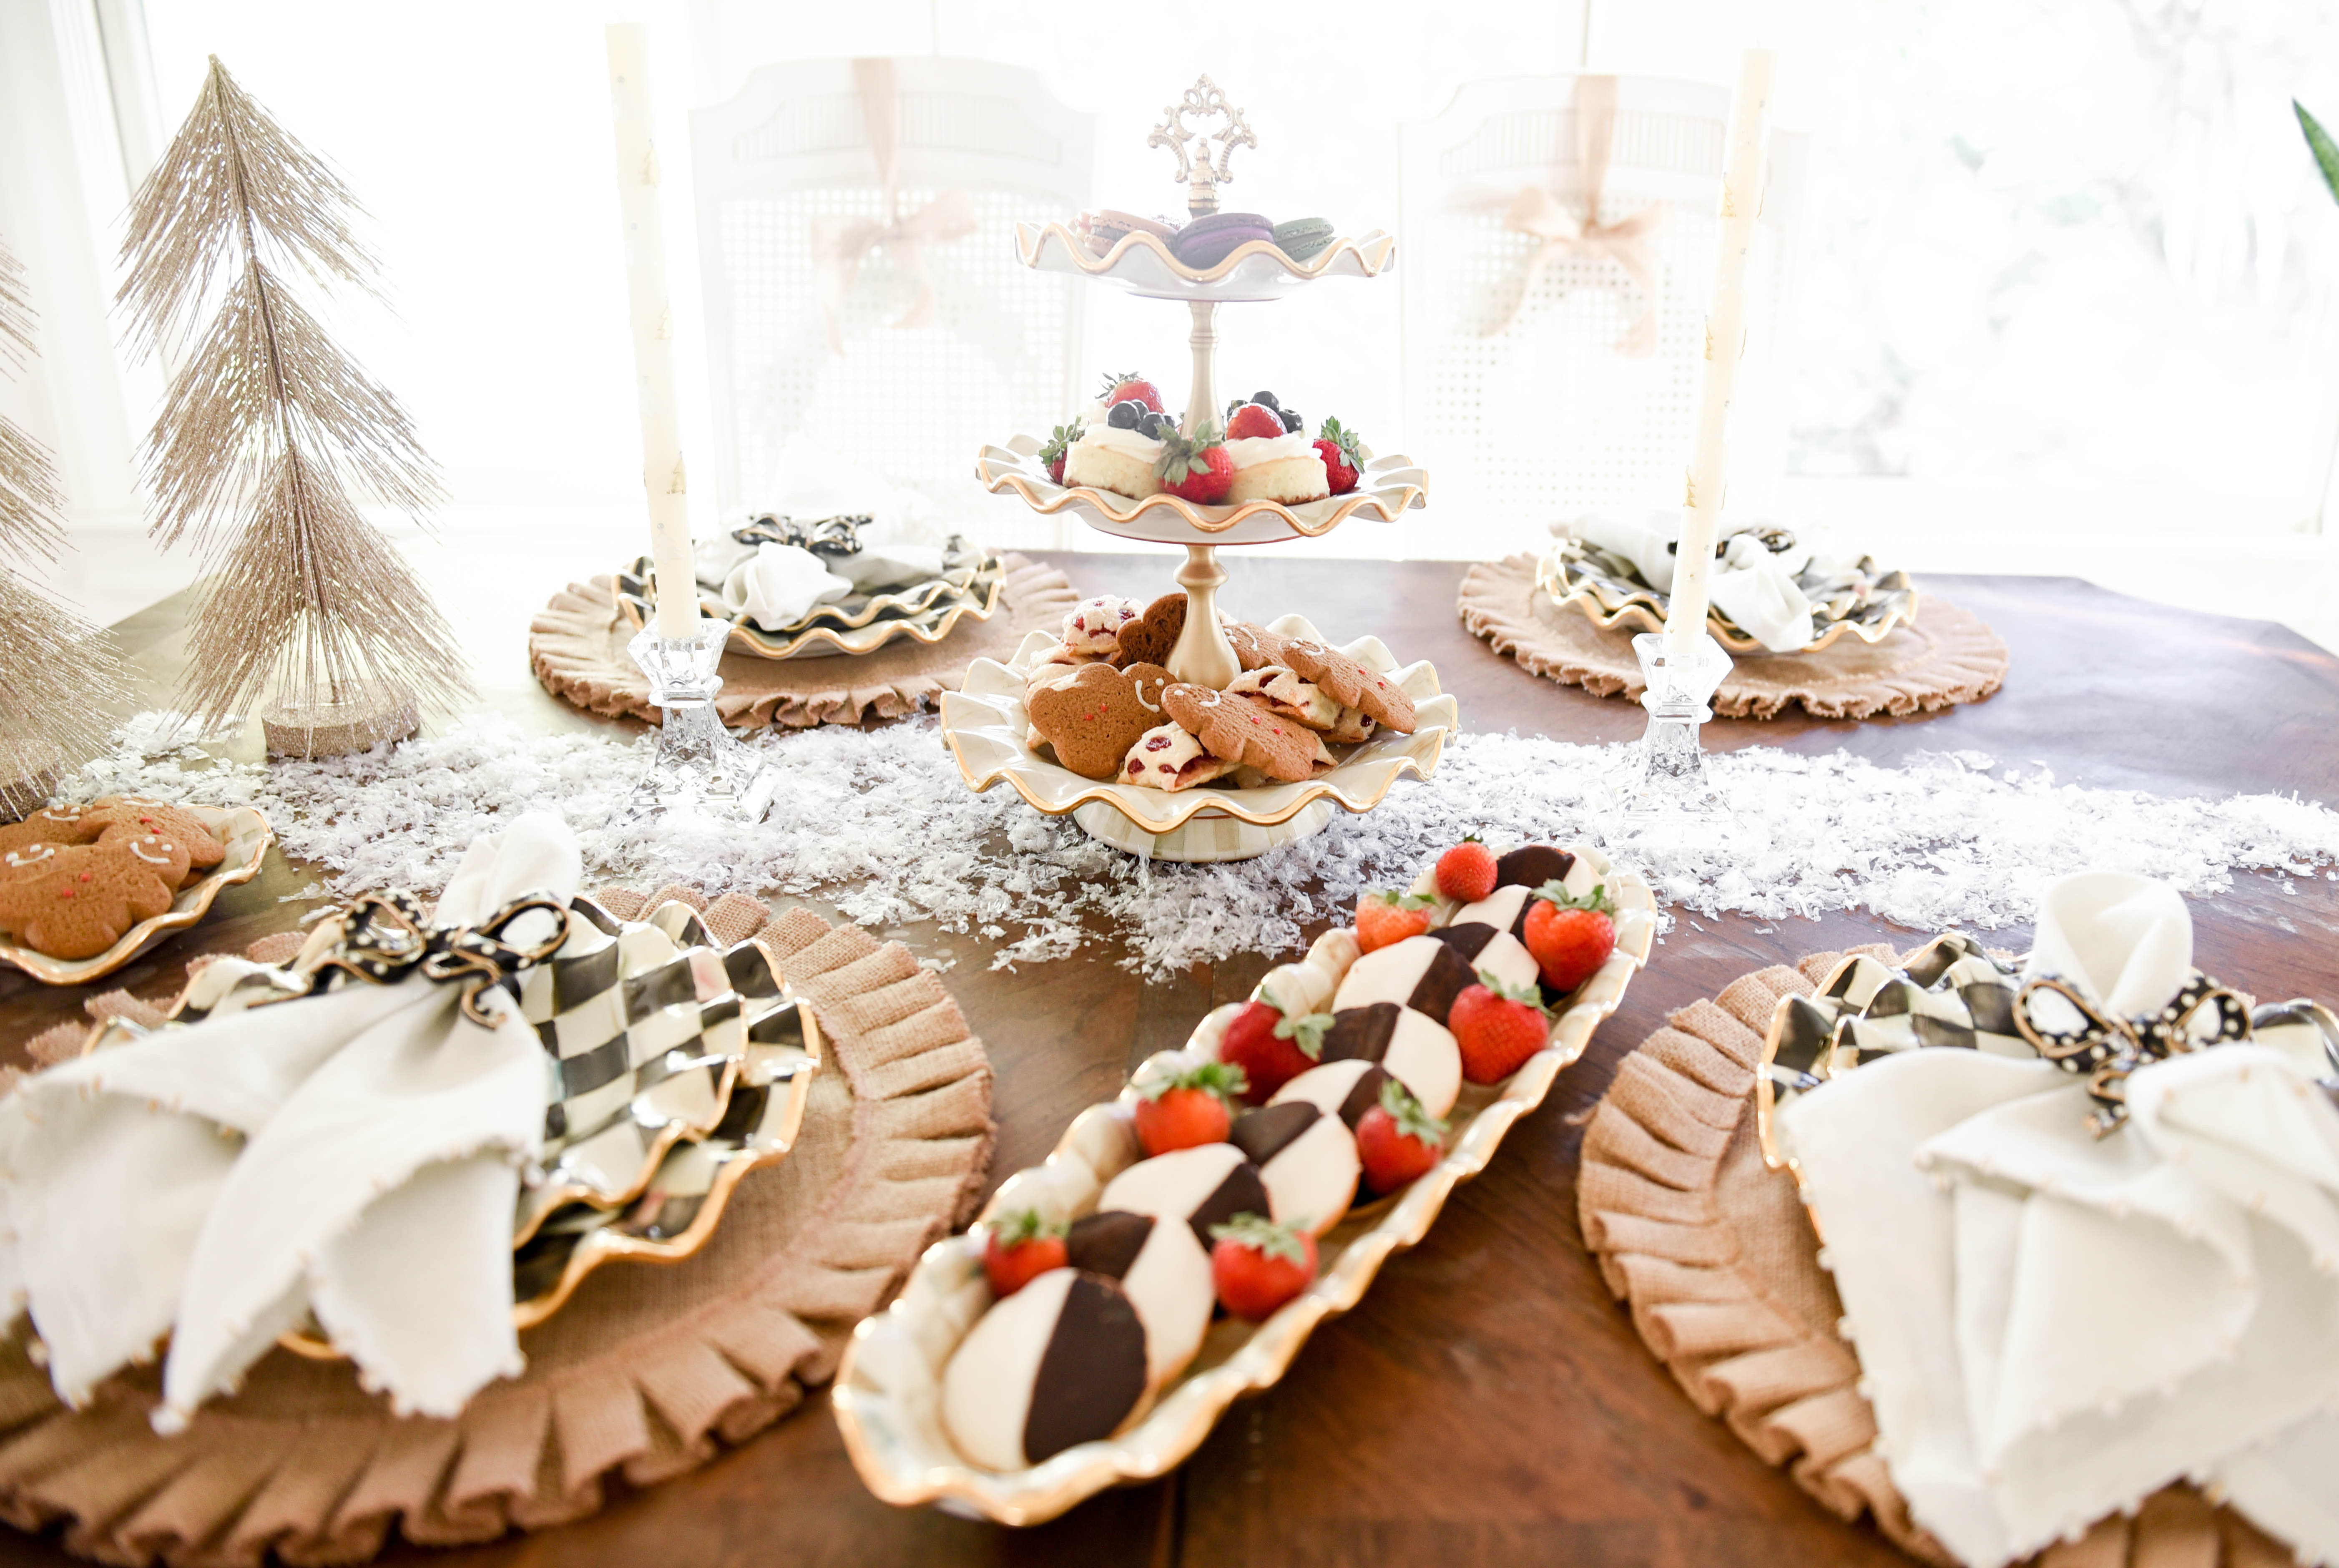 Lo-Murphy-Mackenzie-Childs-Holiday-Tablescape-Home-Decor-dessert-tray-courtley-check-holiday-dining-table-christmas-decor